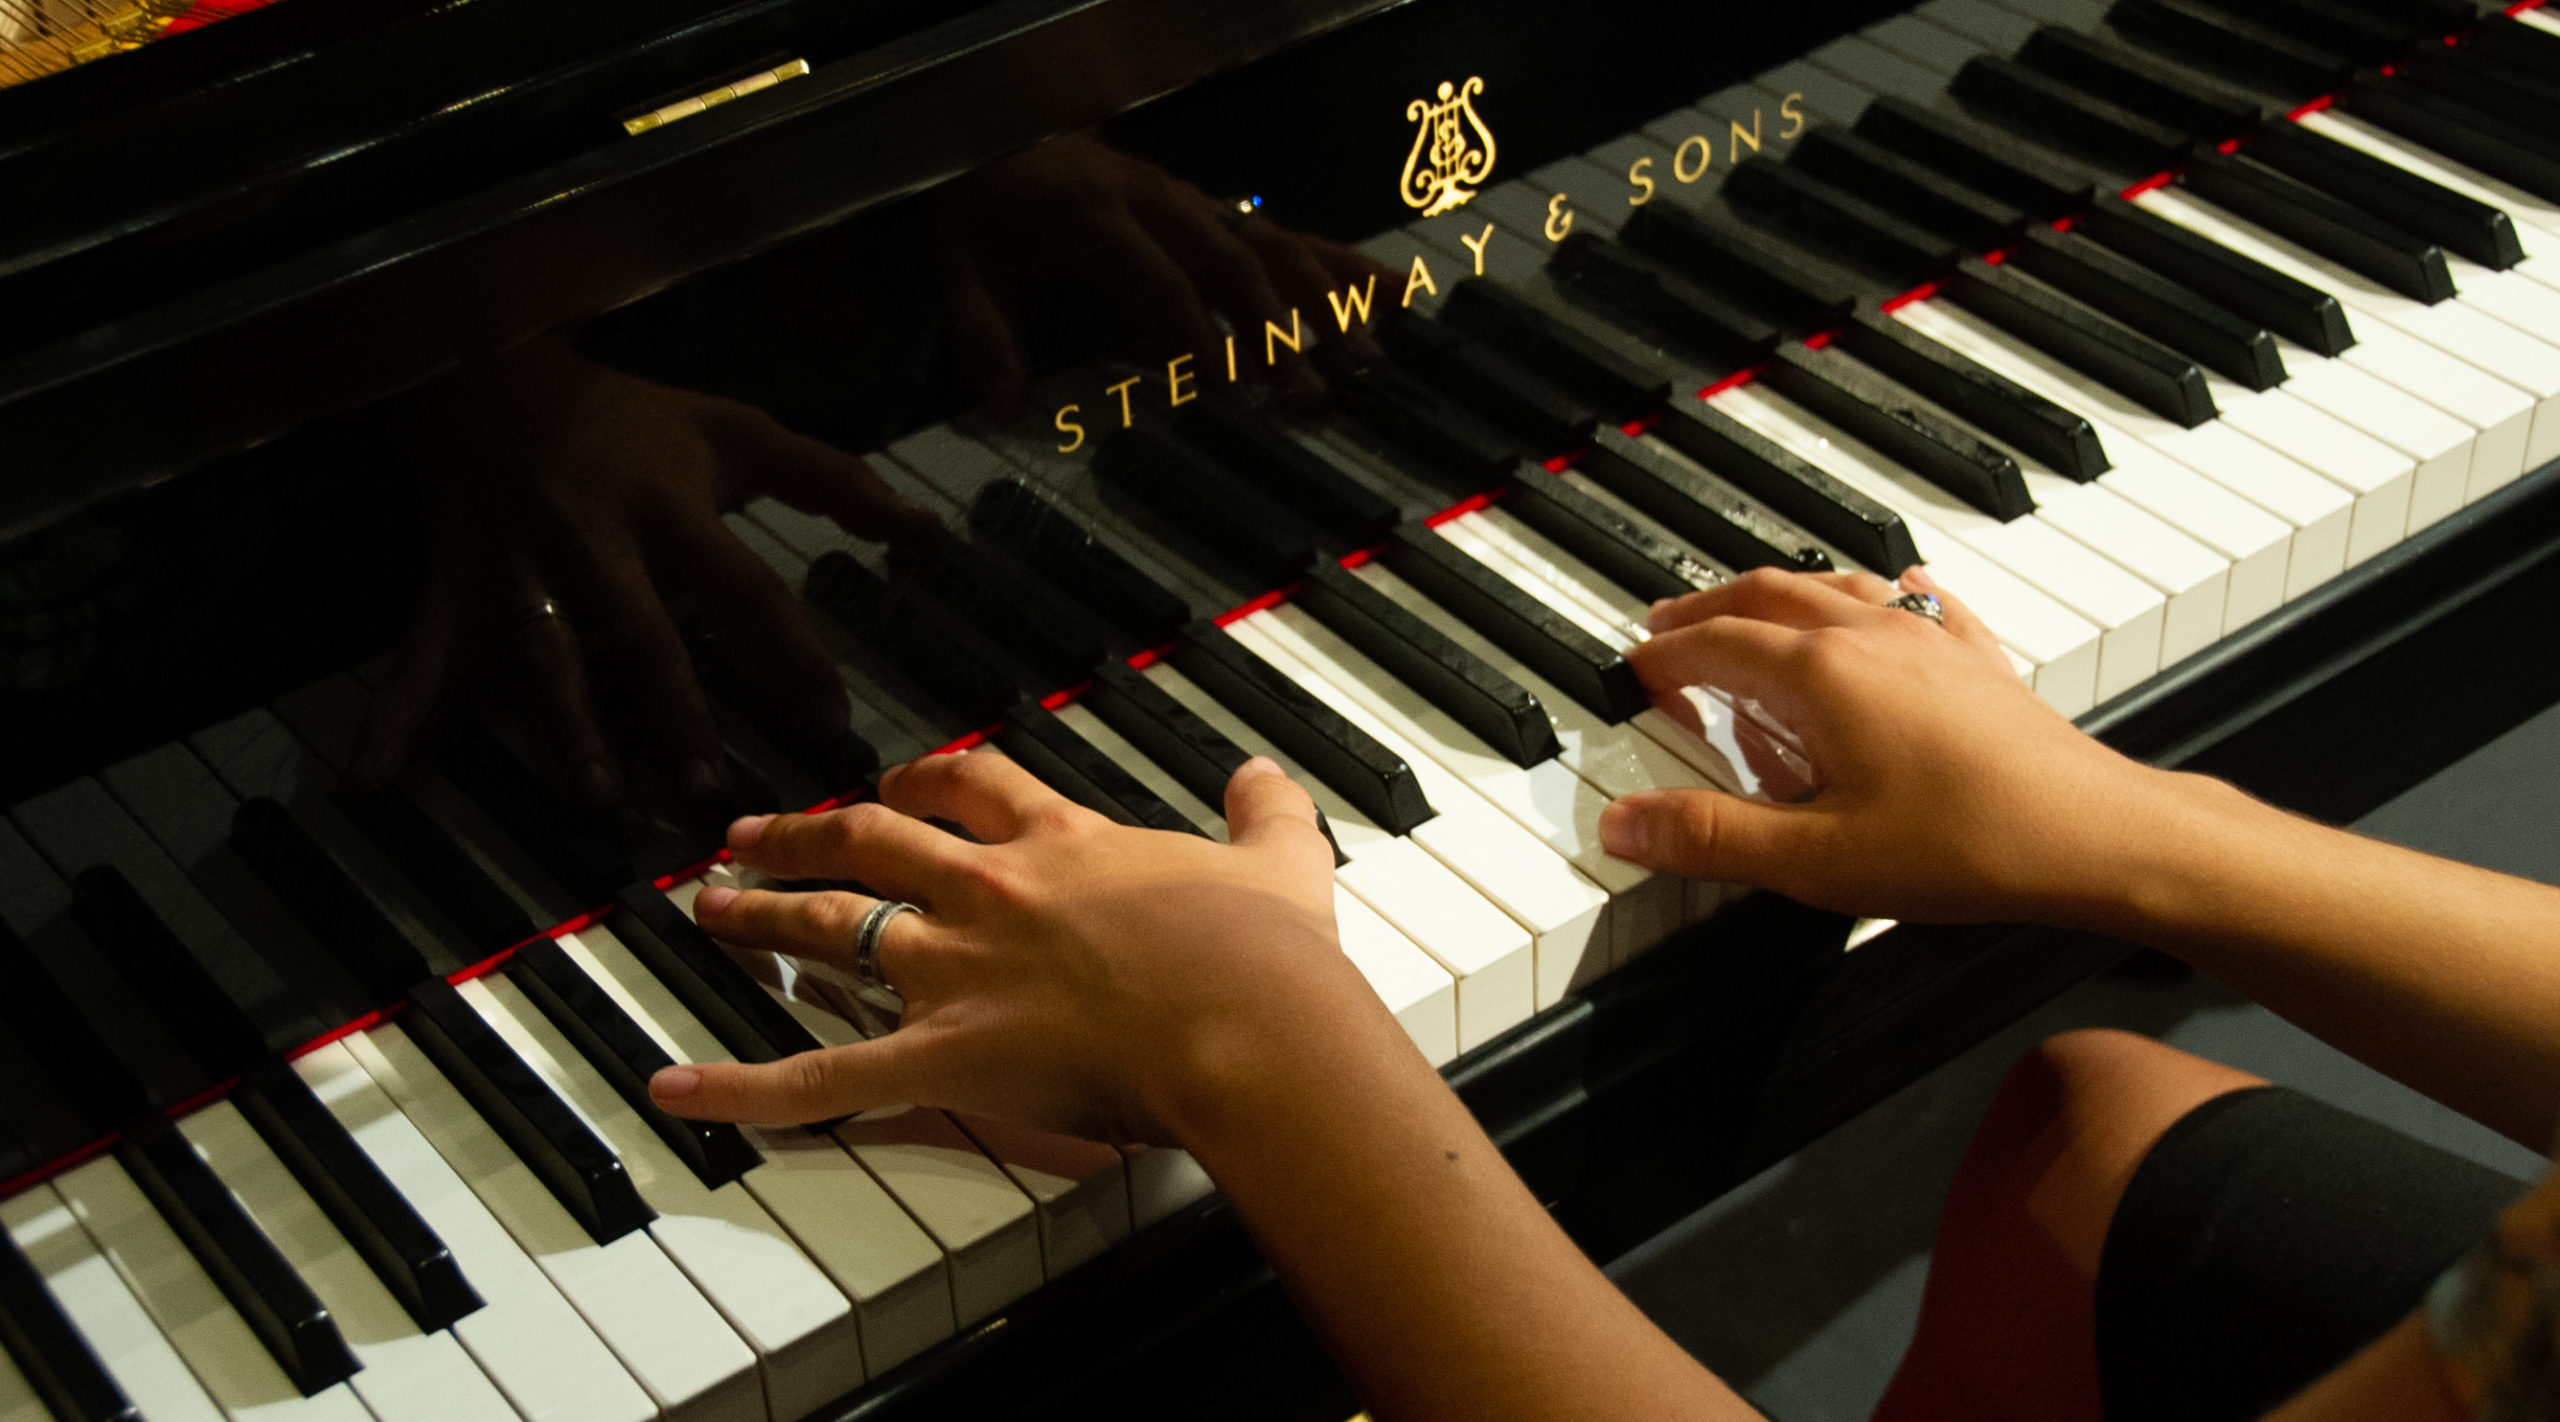 Close-up of hands playing a Steinway & Sons piano.